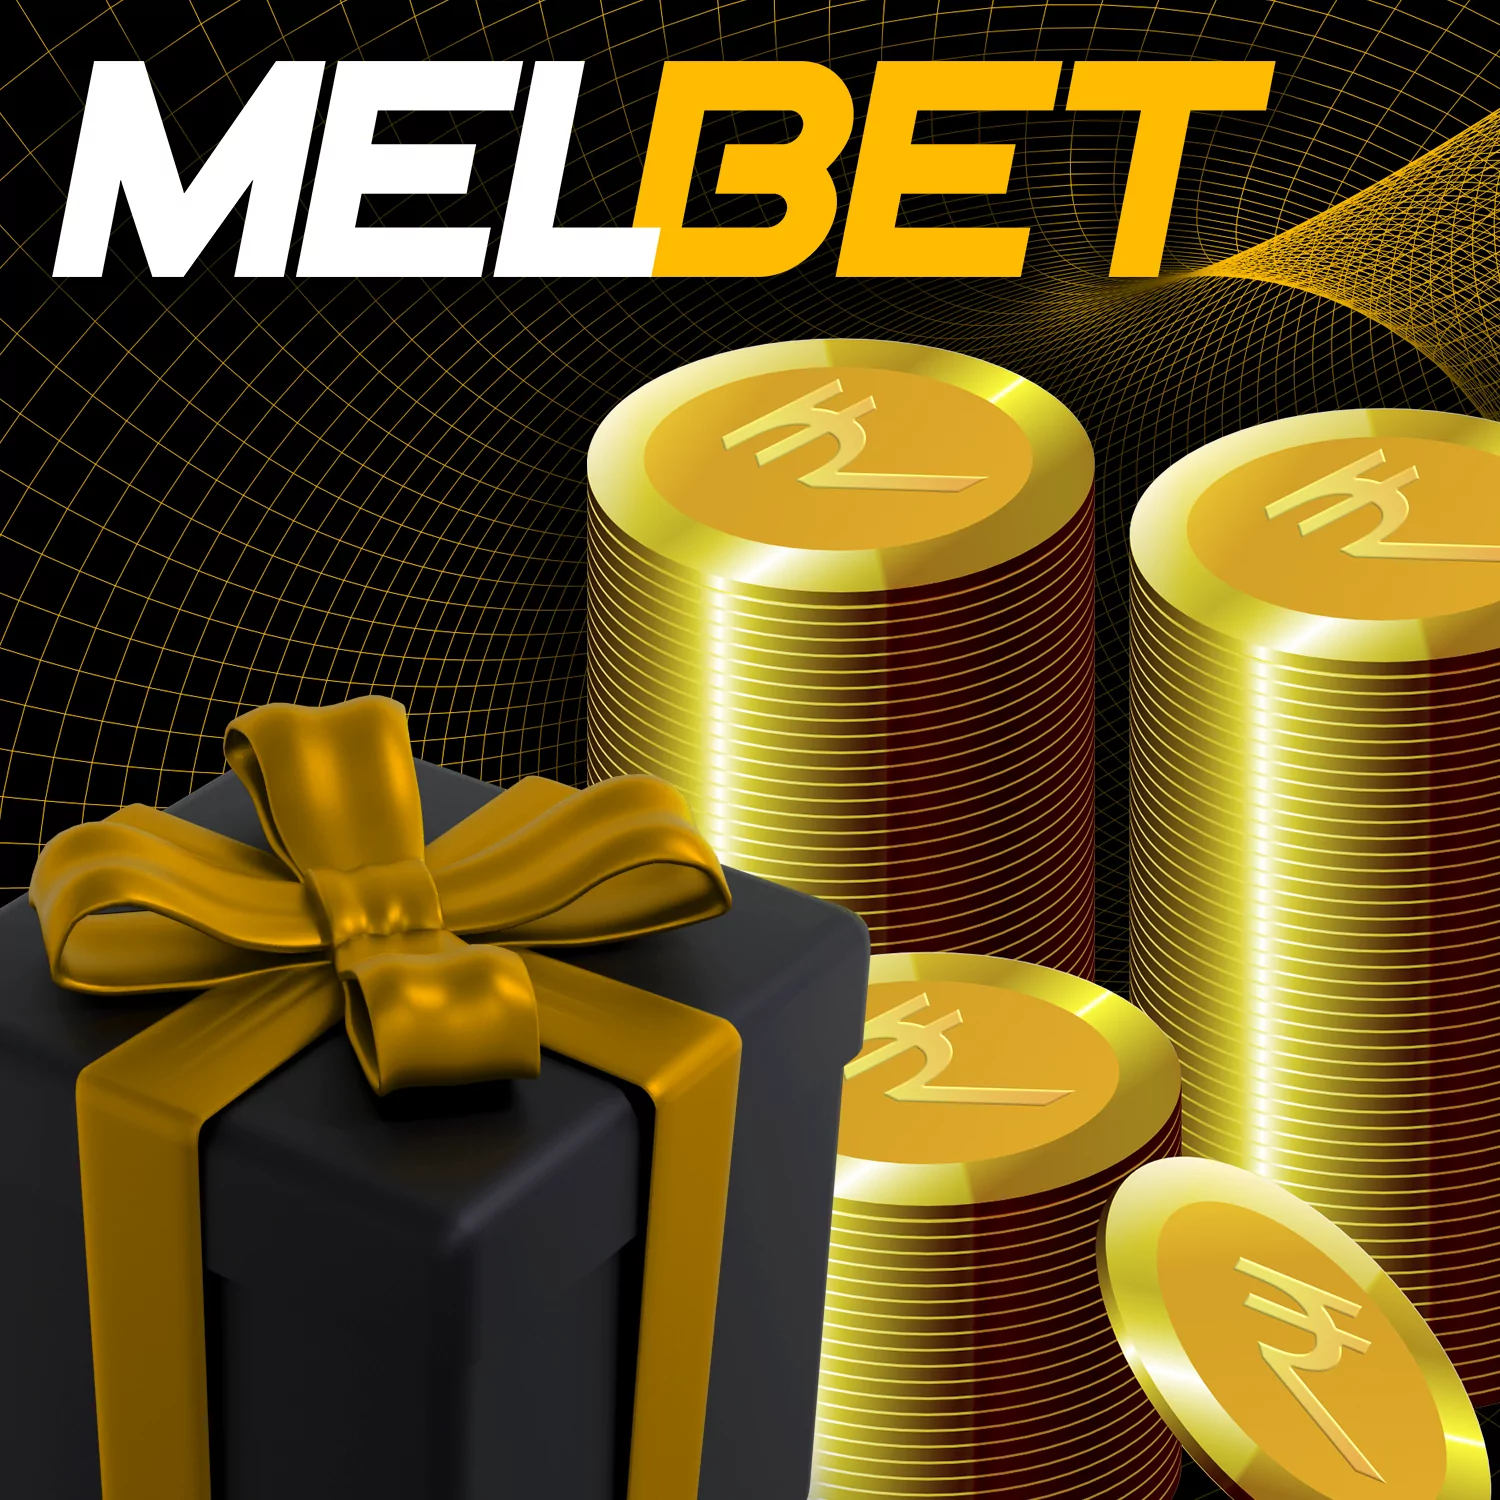 Melbet offers many bonuses and promotions for Indian players.